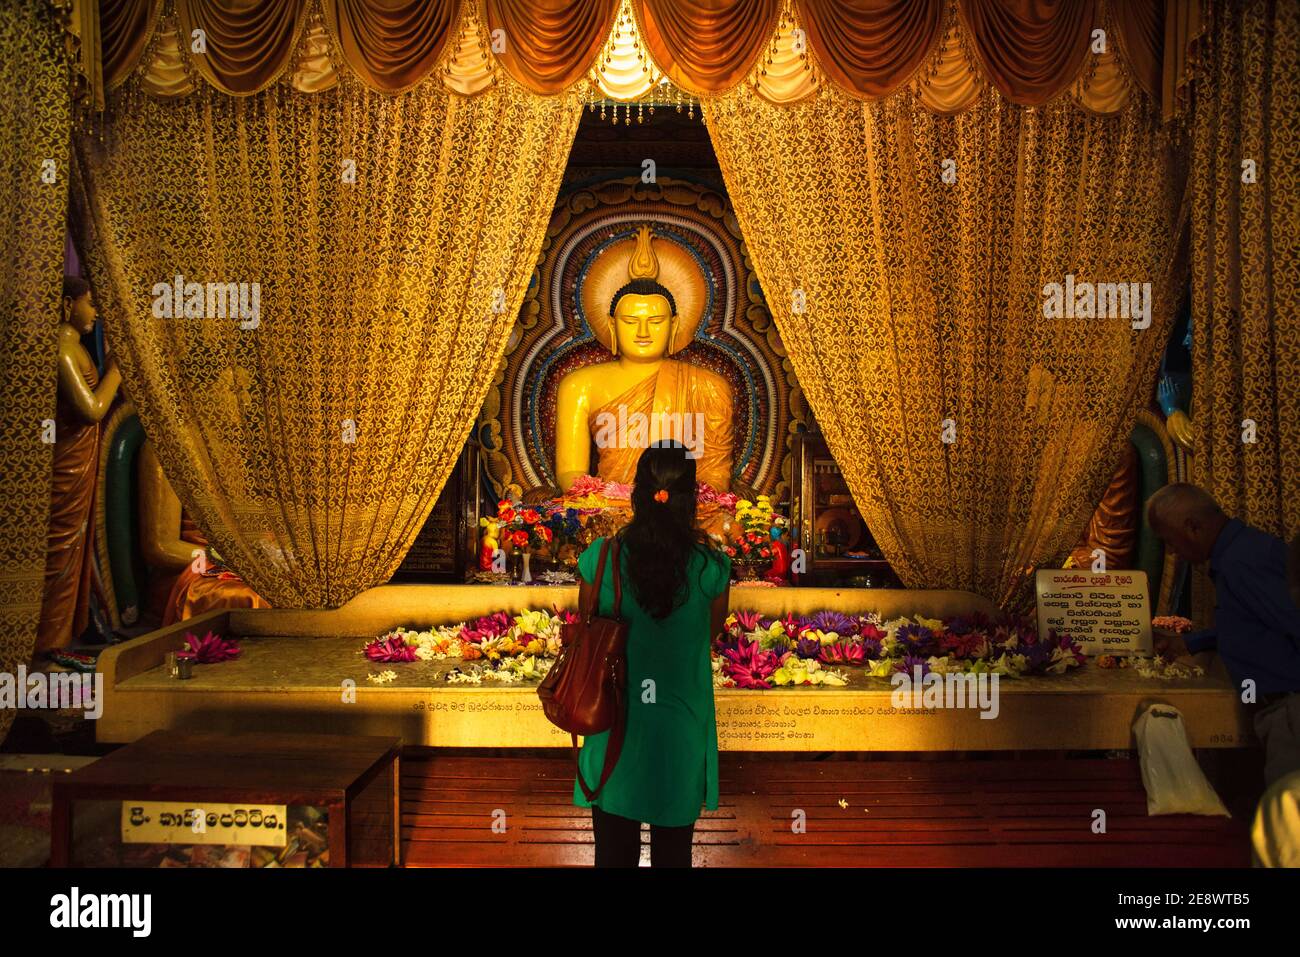 Sri Lanka. Sinhalese woman praying in front of a golden buddha Statue in a temple at an altar. Stock Photo